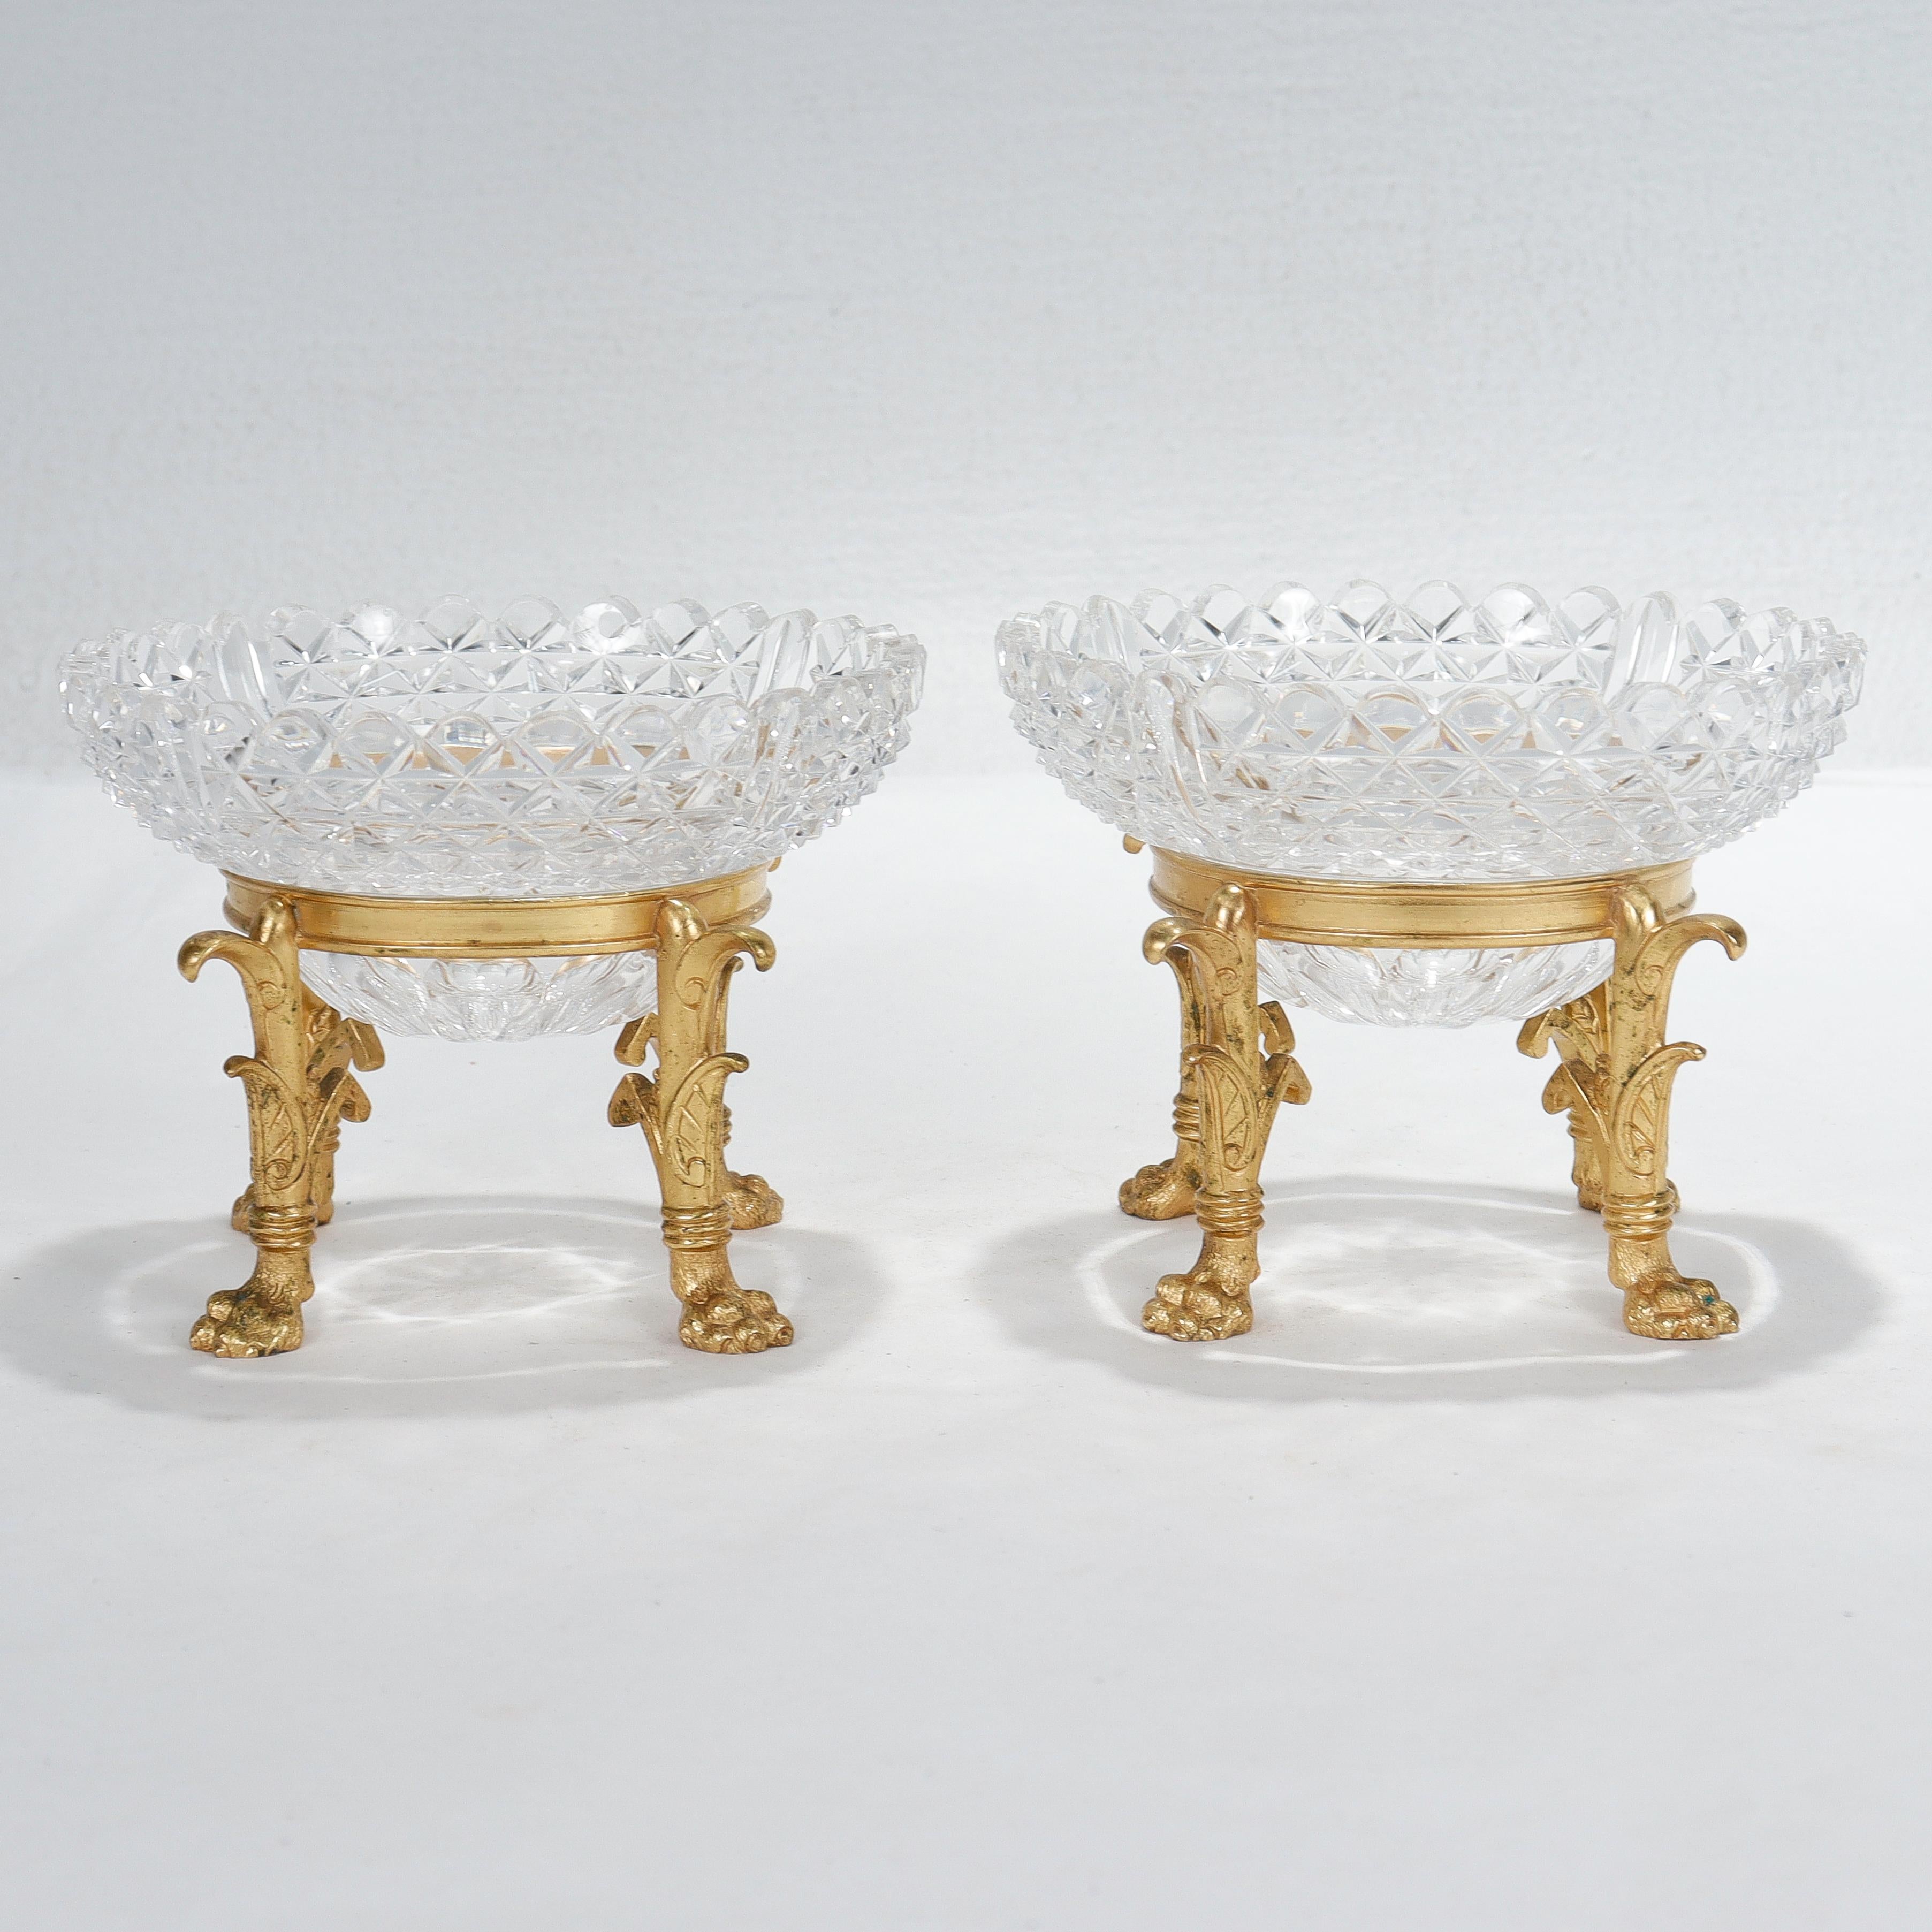 A fine pair of small scale footed bowls. 

In gilt (vermeil) bronze and cut glass.

Attributed to F. & C. Osler.

With Egyptian Revival style hairy paw feet and removable cut glass bowls that rest in a ring supported by four legs.

Simply a